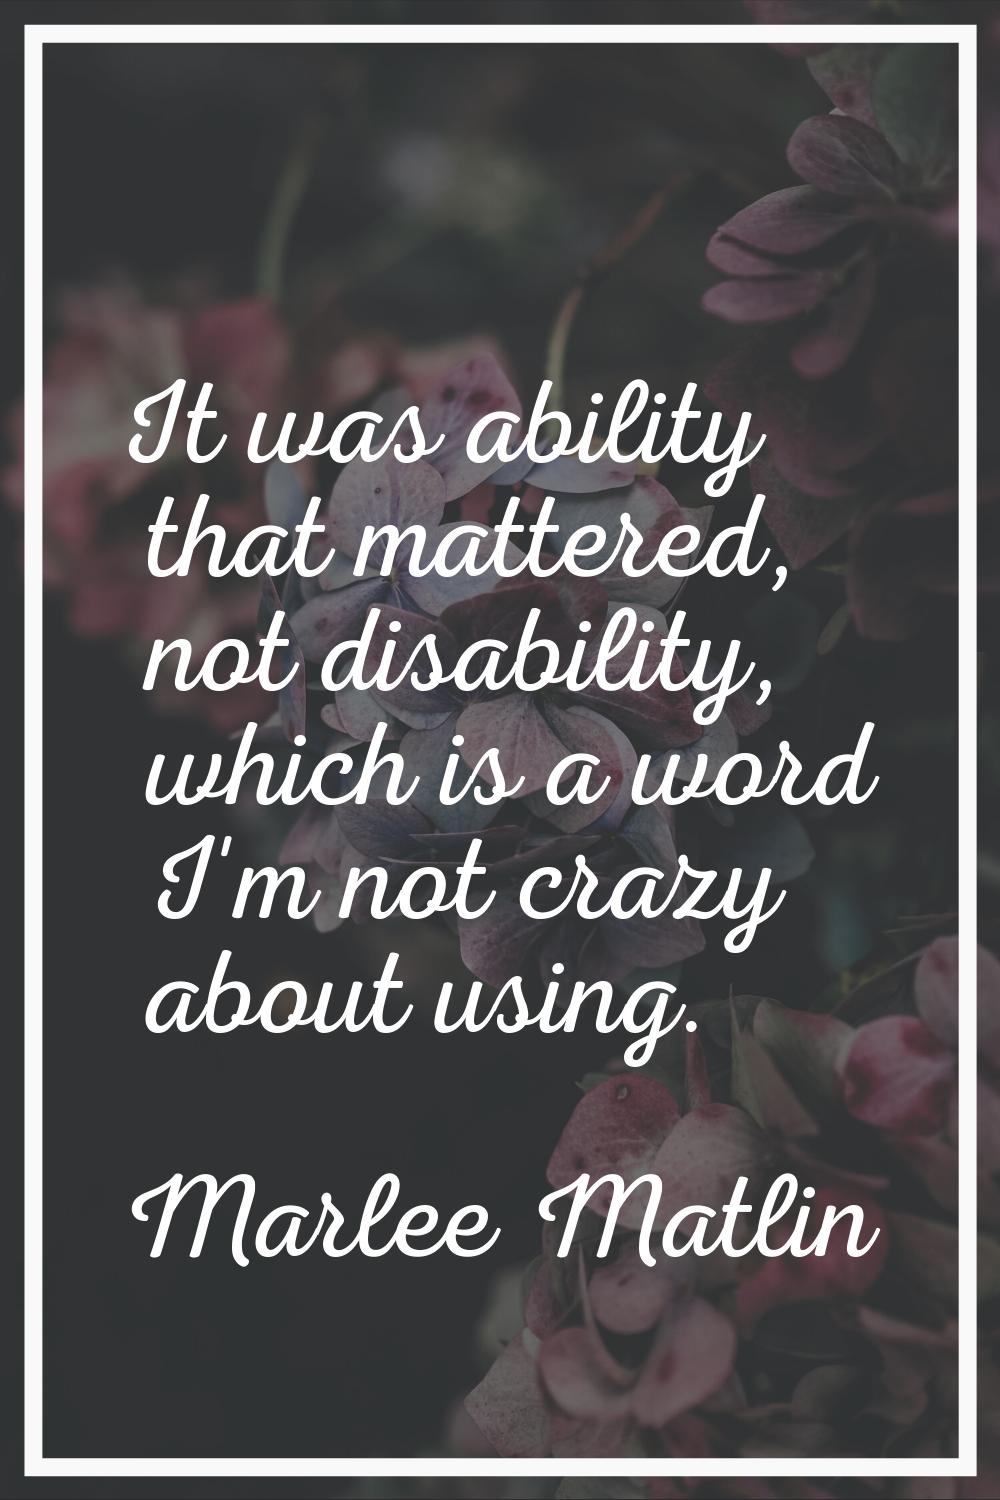 It was ability that mattered, not disability, which is a word I'm not crazy about using.